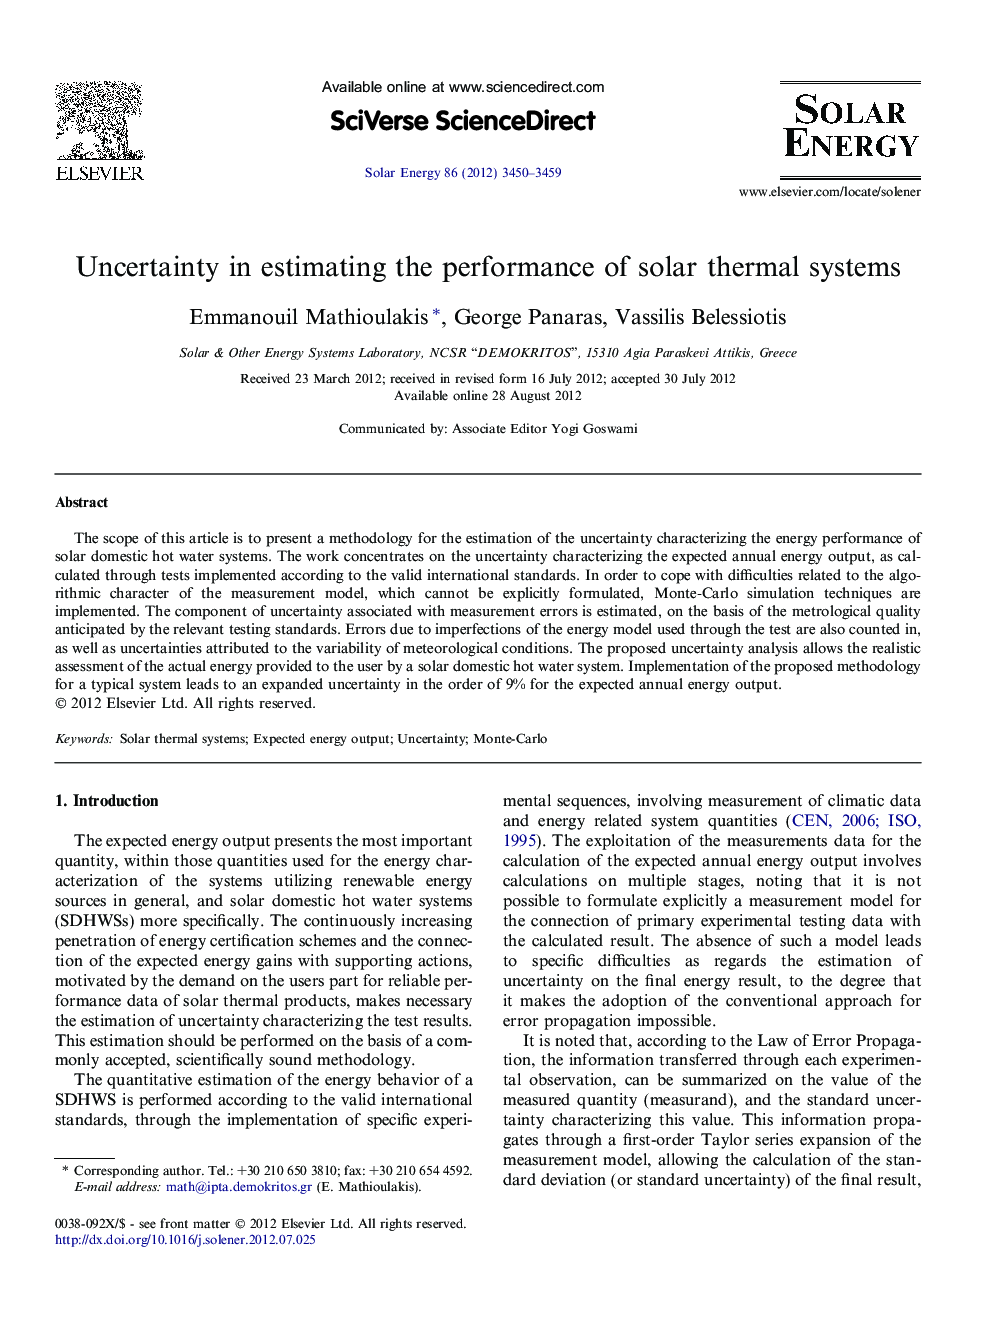 Uncertainty in estimating the performance of solar thermal systems